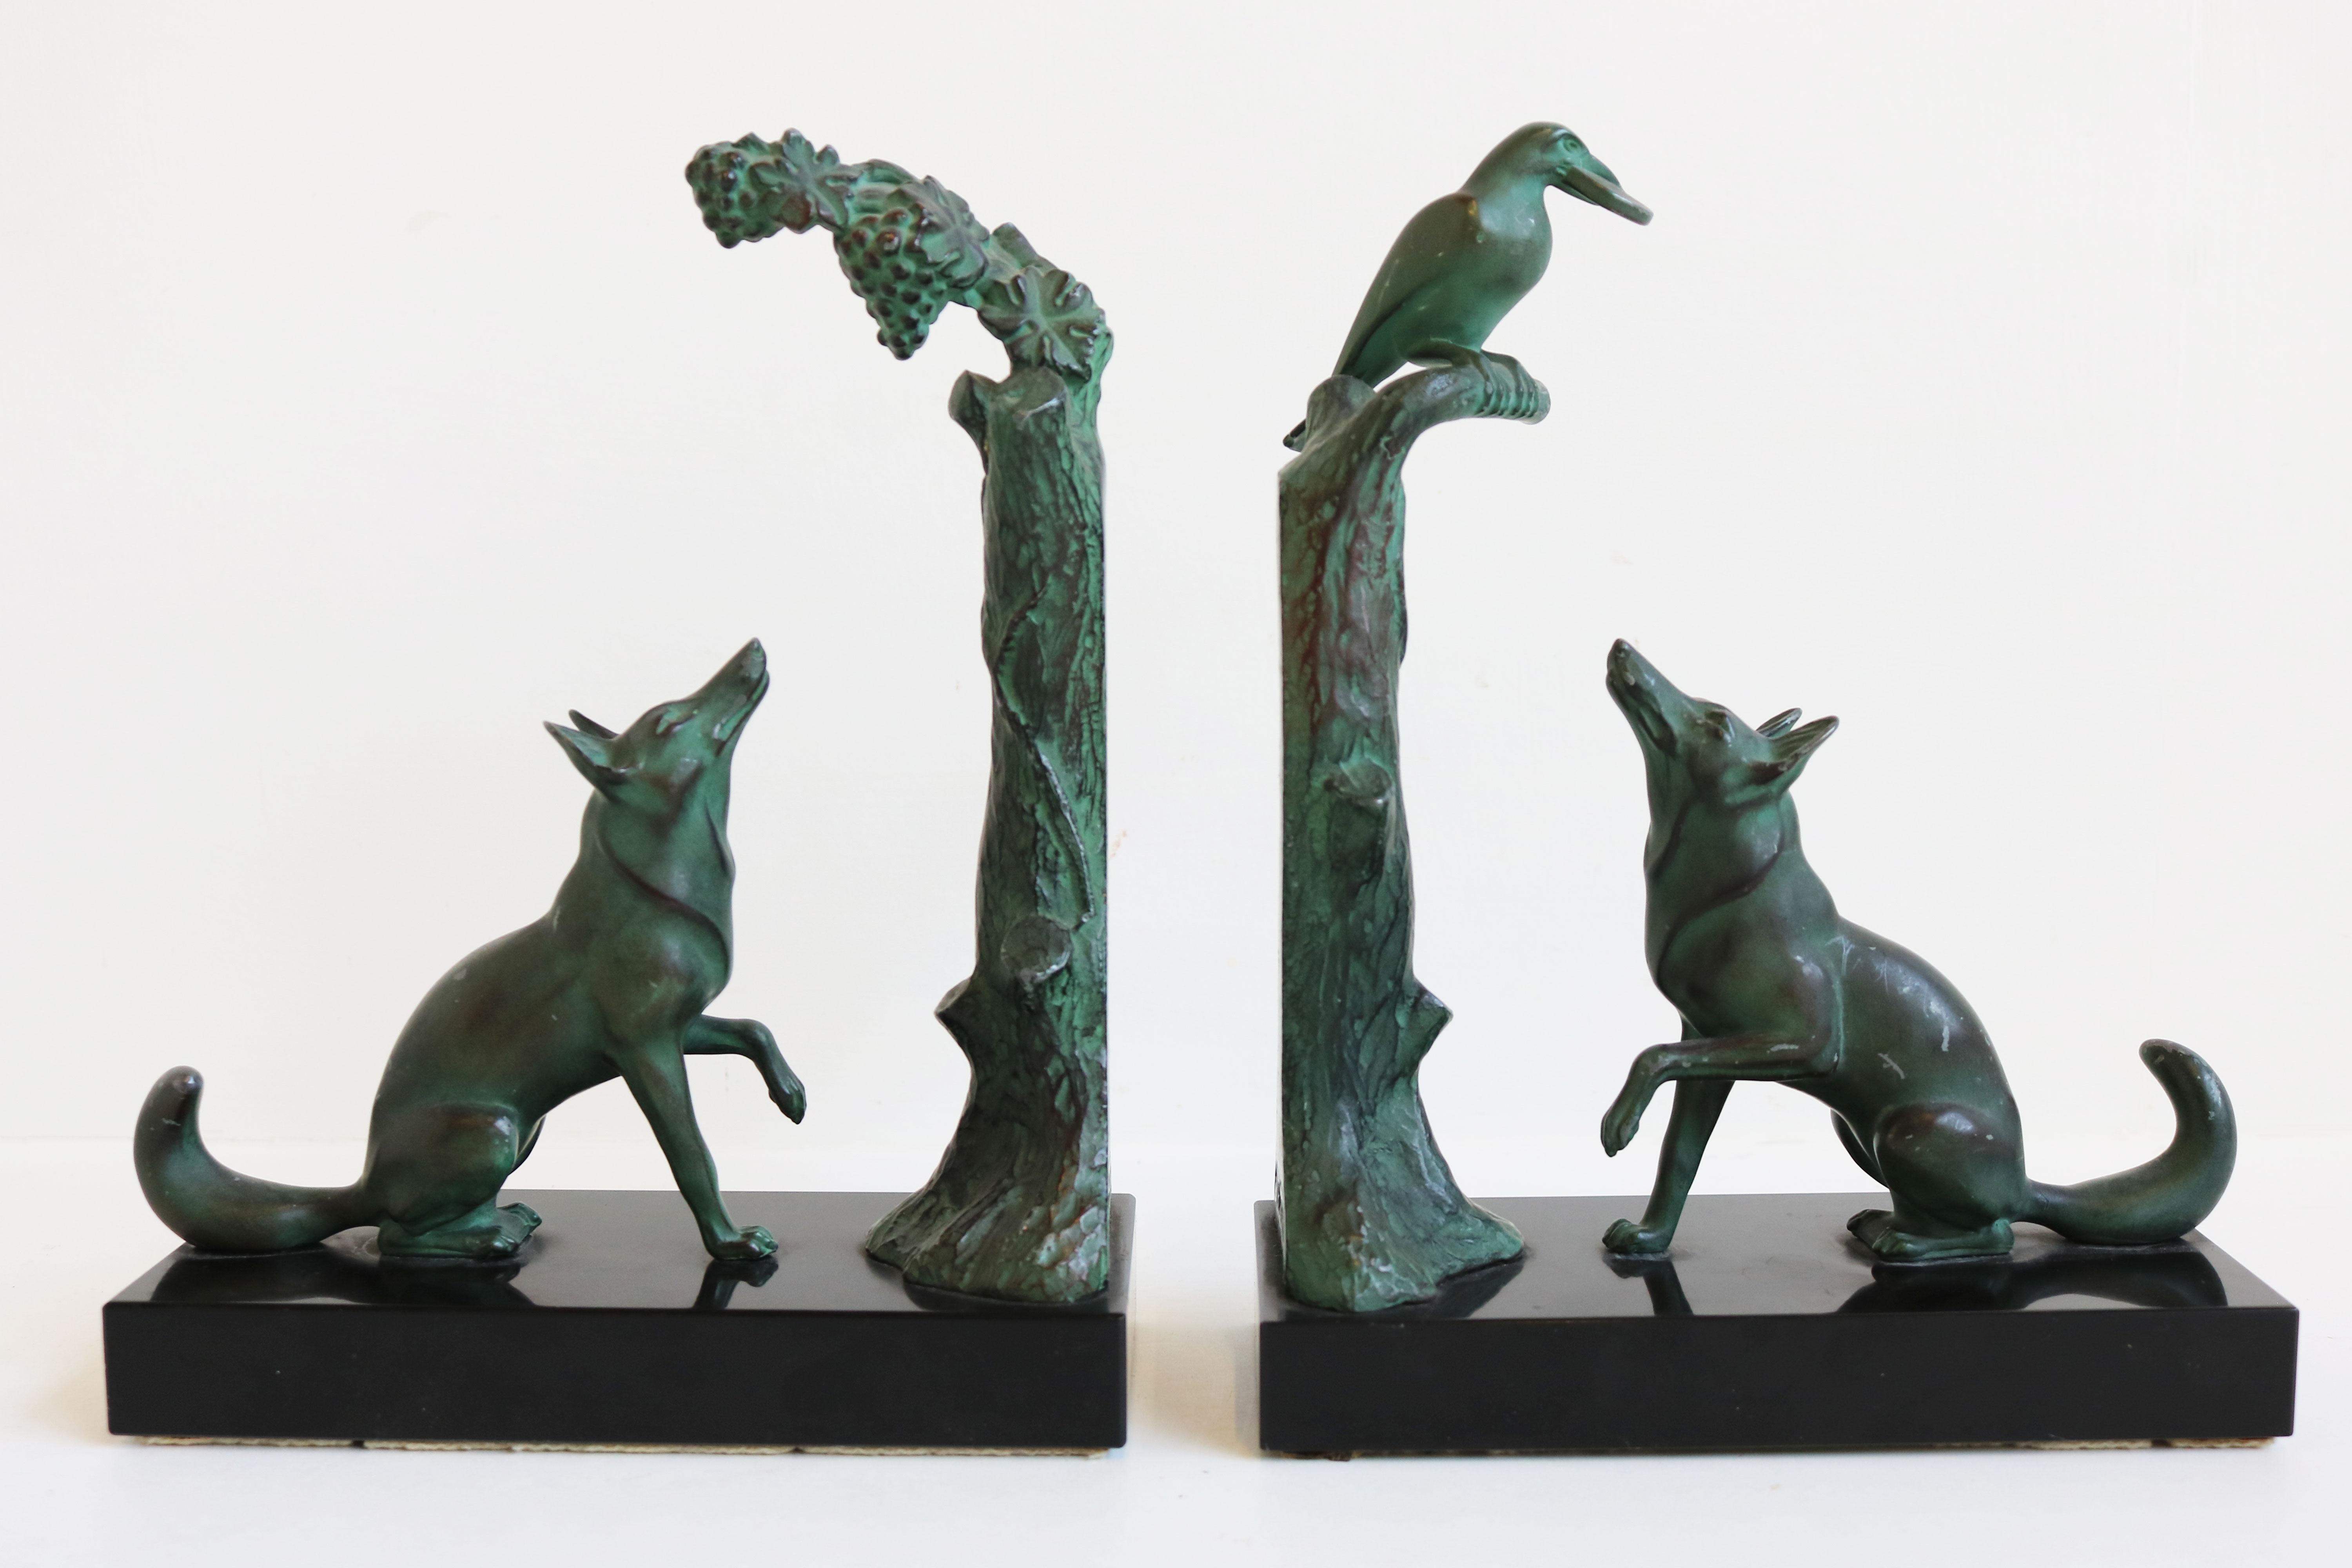 Marvelous French Antique Art Deco Bookends by Max Le Verrier 1930. 
The pair of bookends represent 2 famous fables 